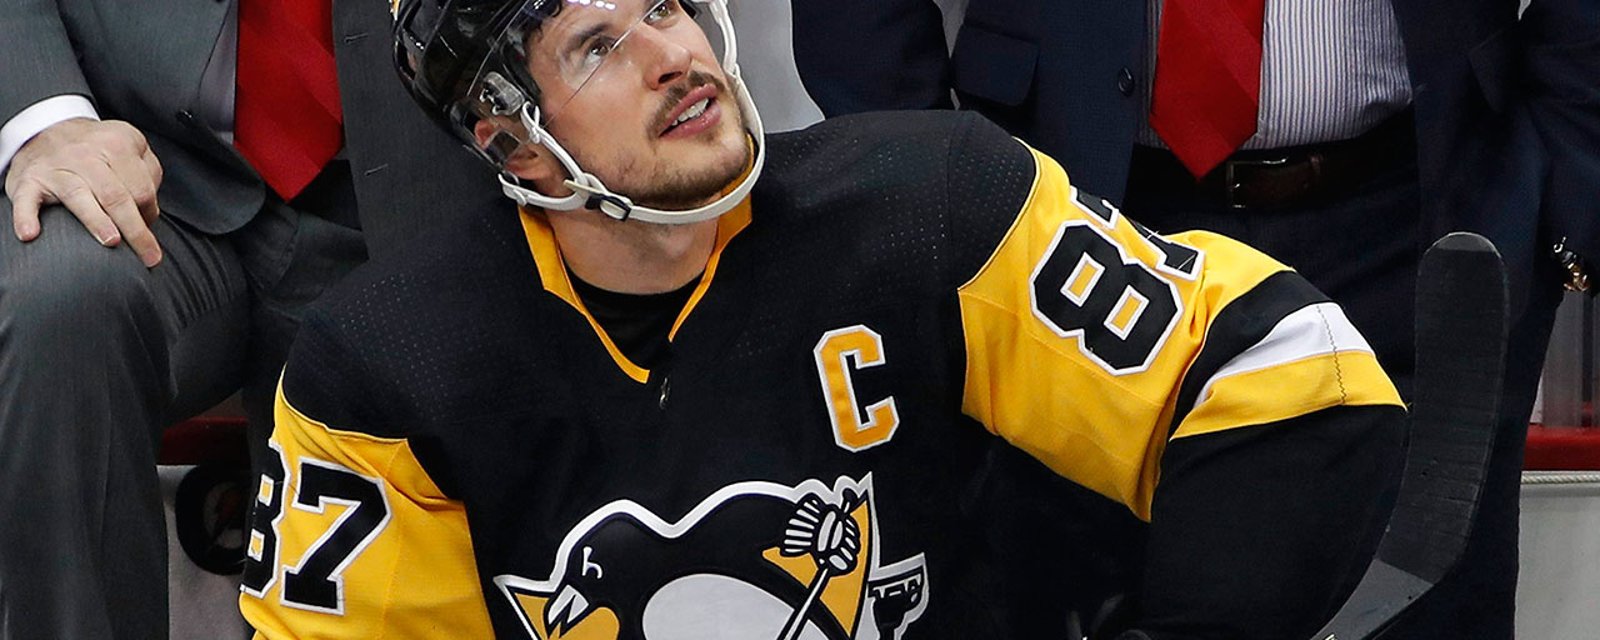 Ron Hextall reaches out to Sidney Crosby for Pens’ upcoming changes 